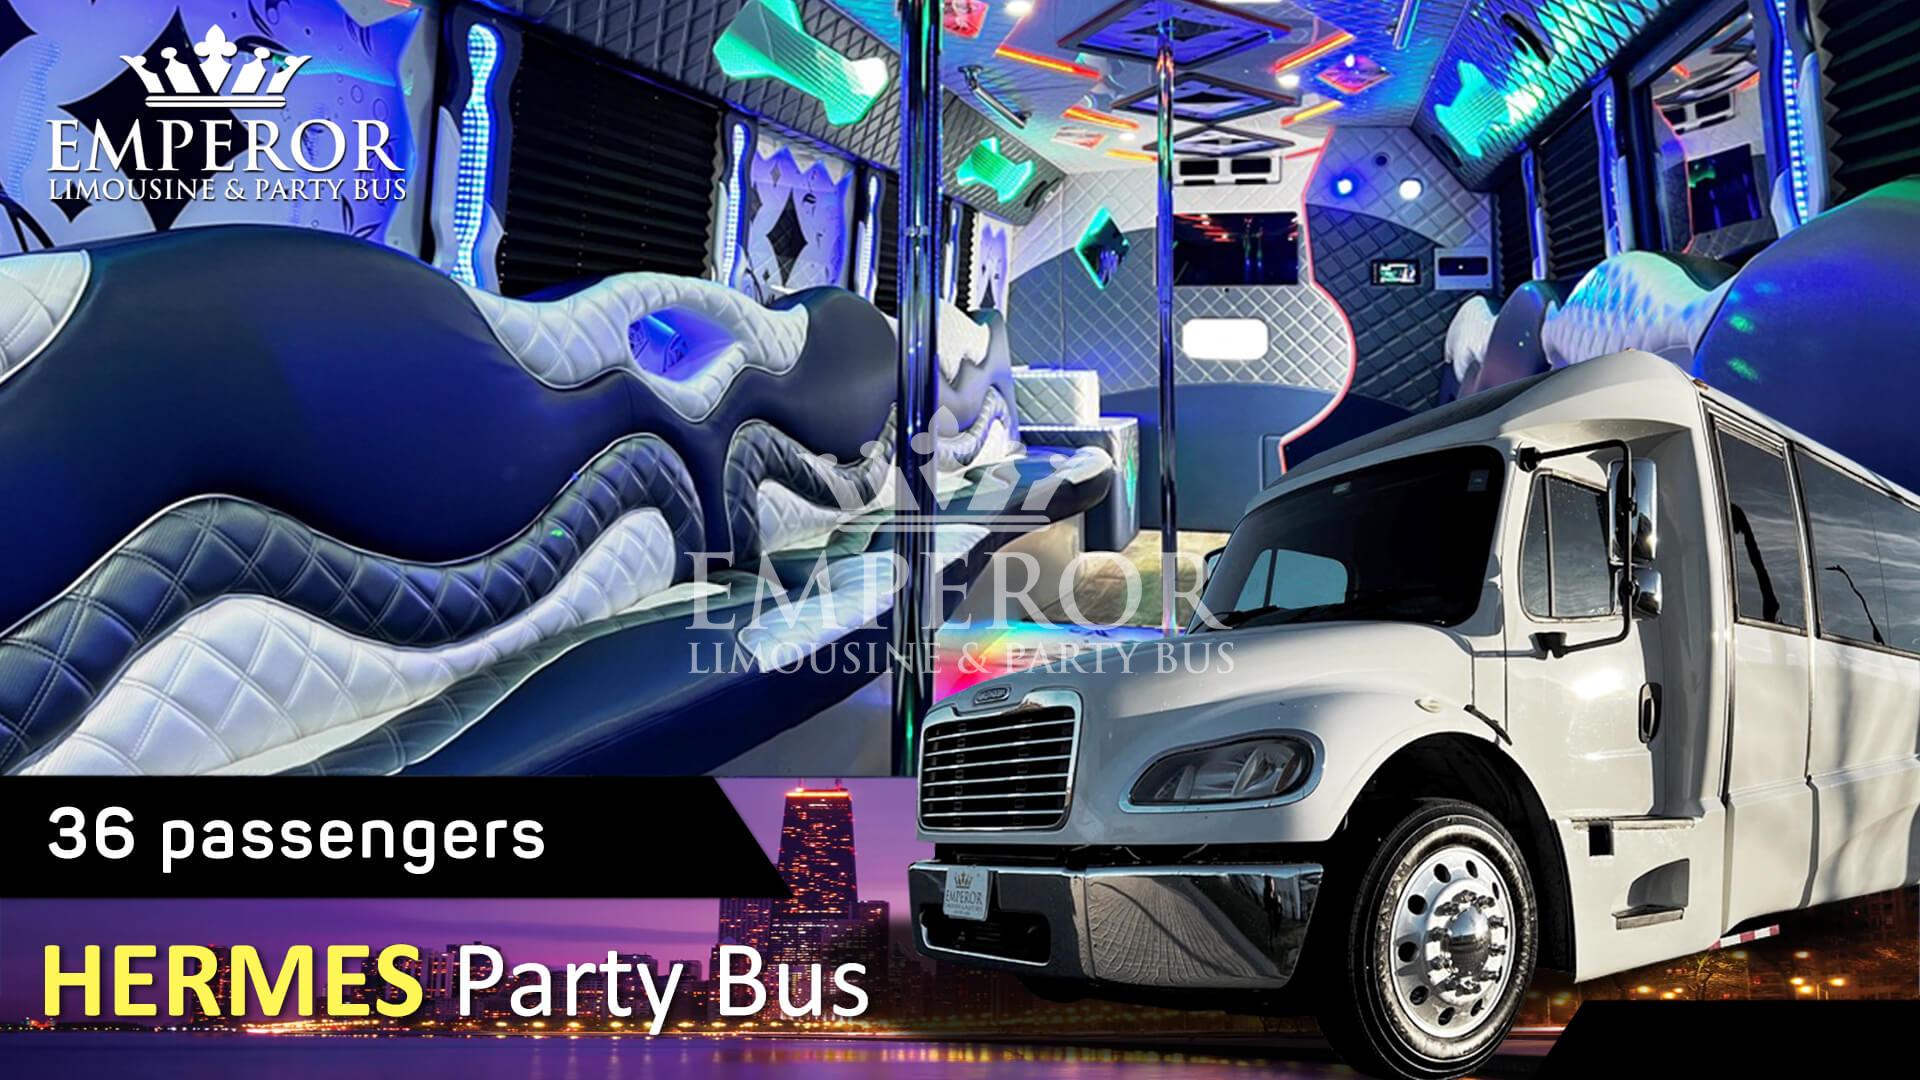 Party bus for corporate events - Hermes edition